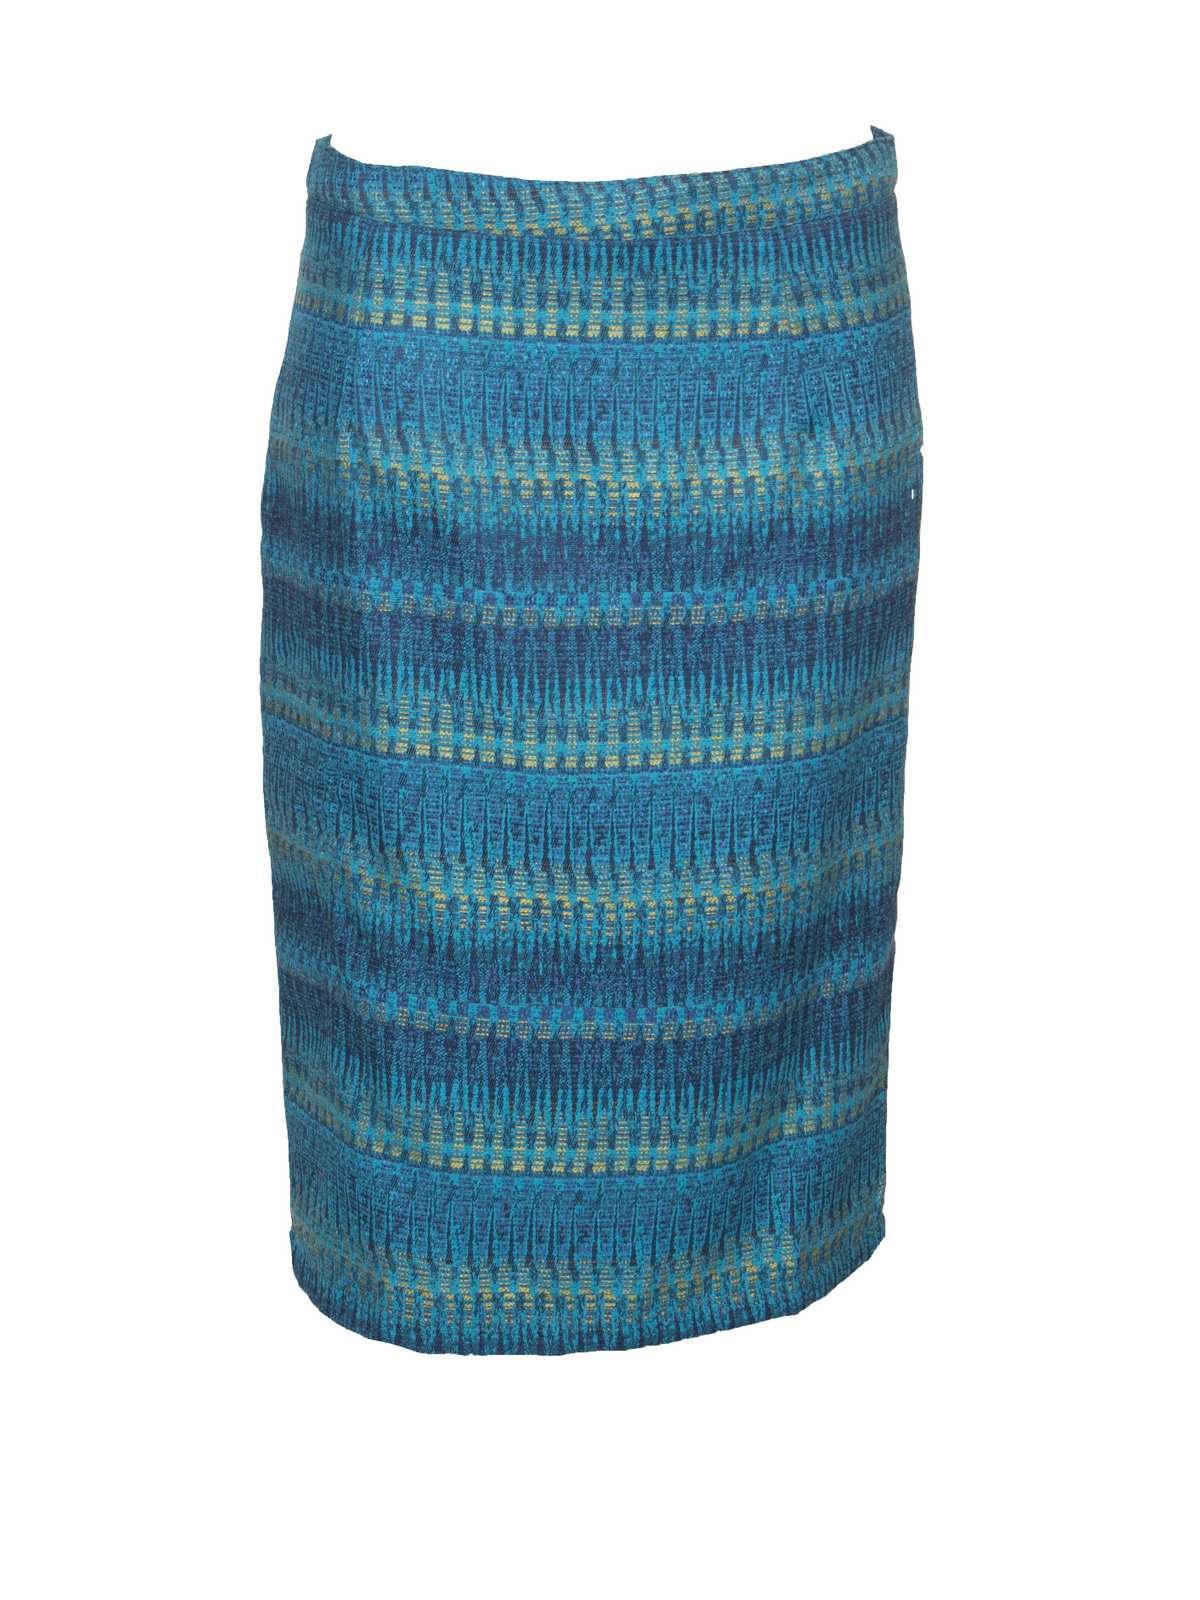 Lily and Me Woven Jacquard Pencil Skirt Blue